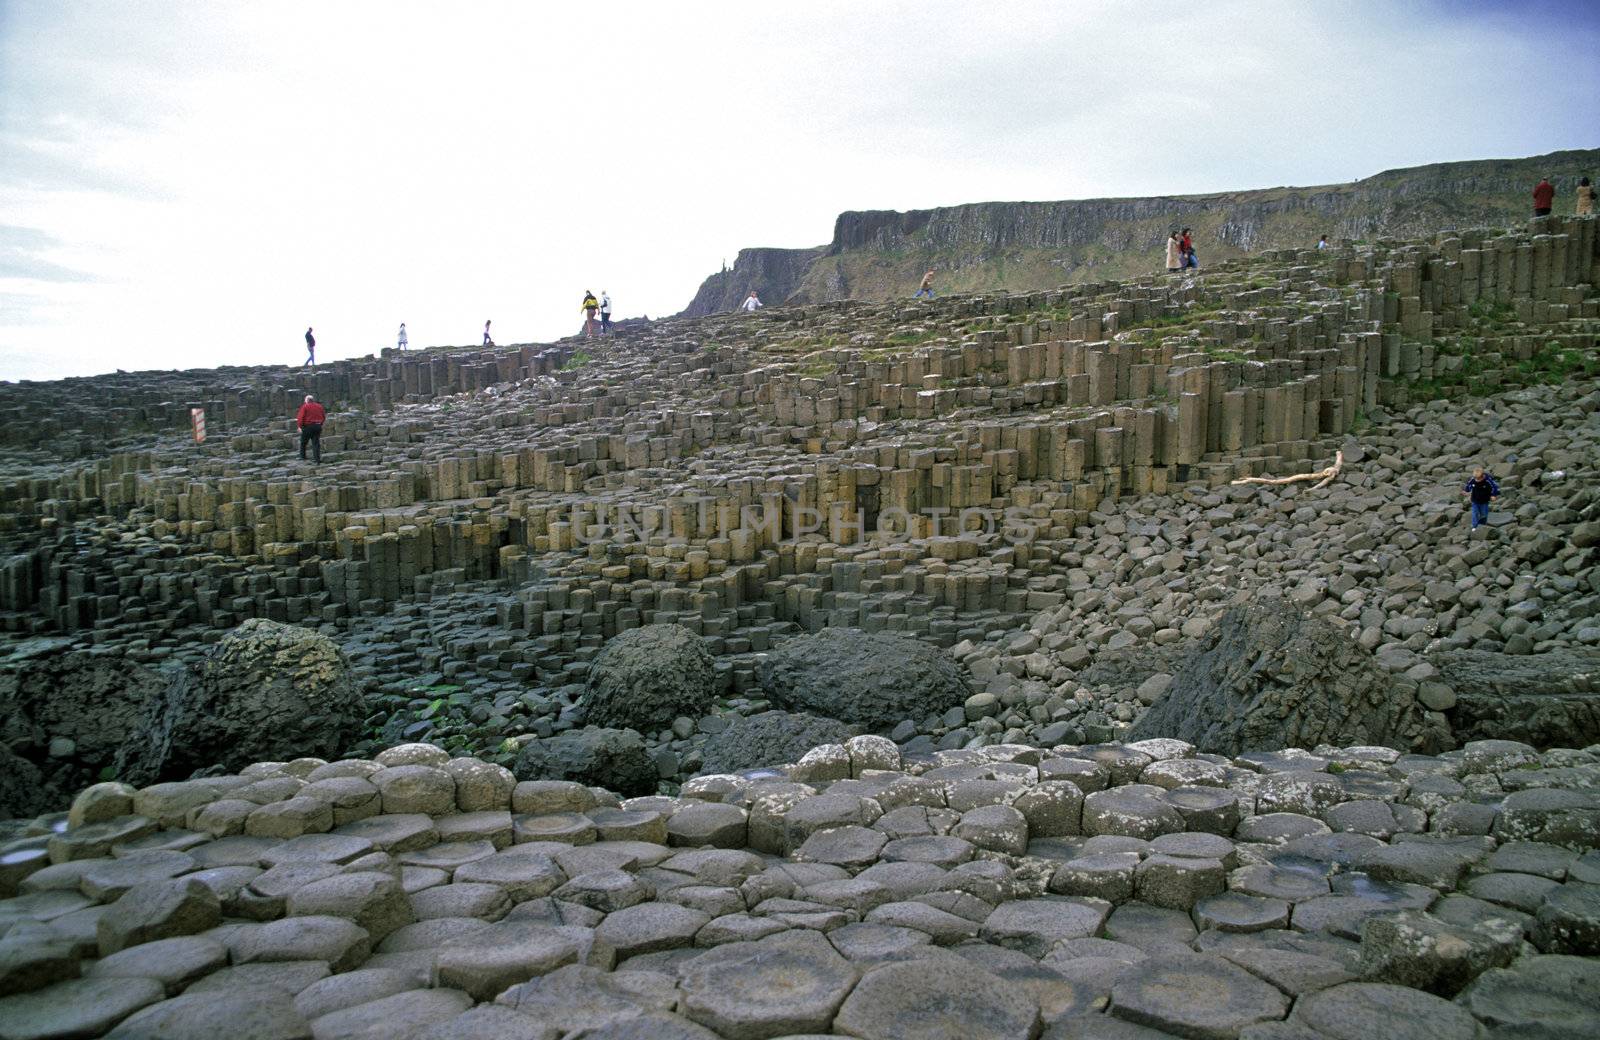 Tourists on the Giant's Causeway by ACMPhoto